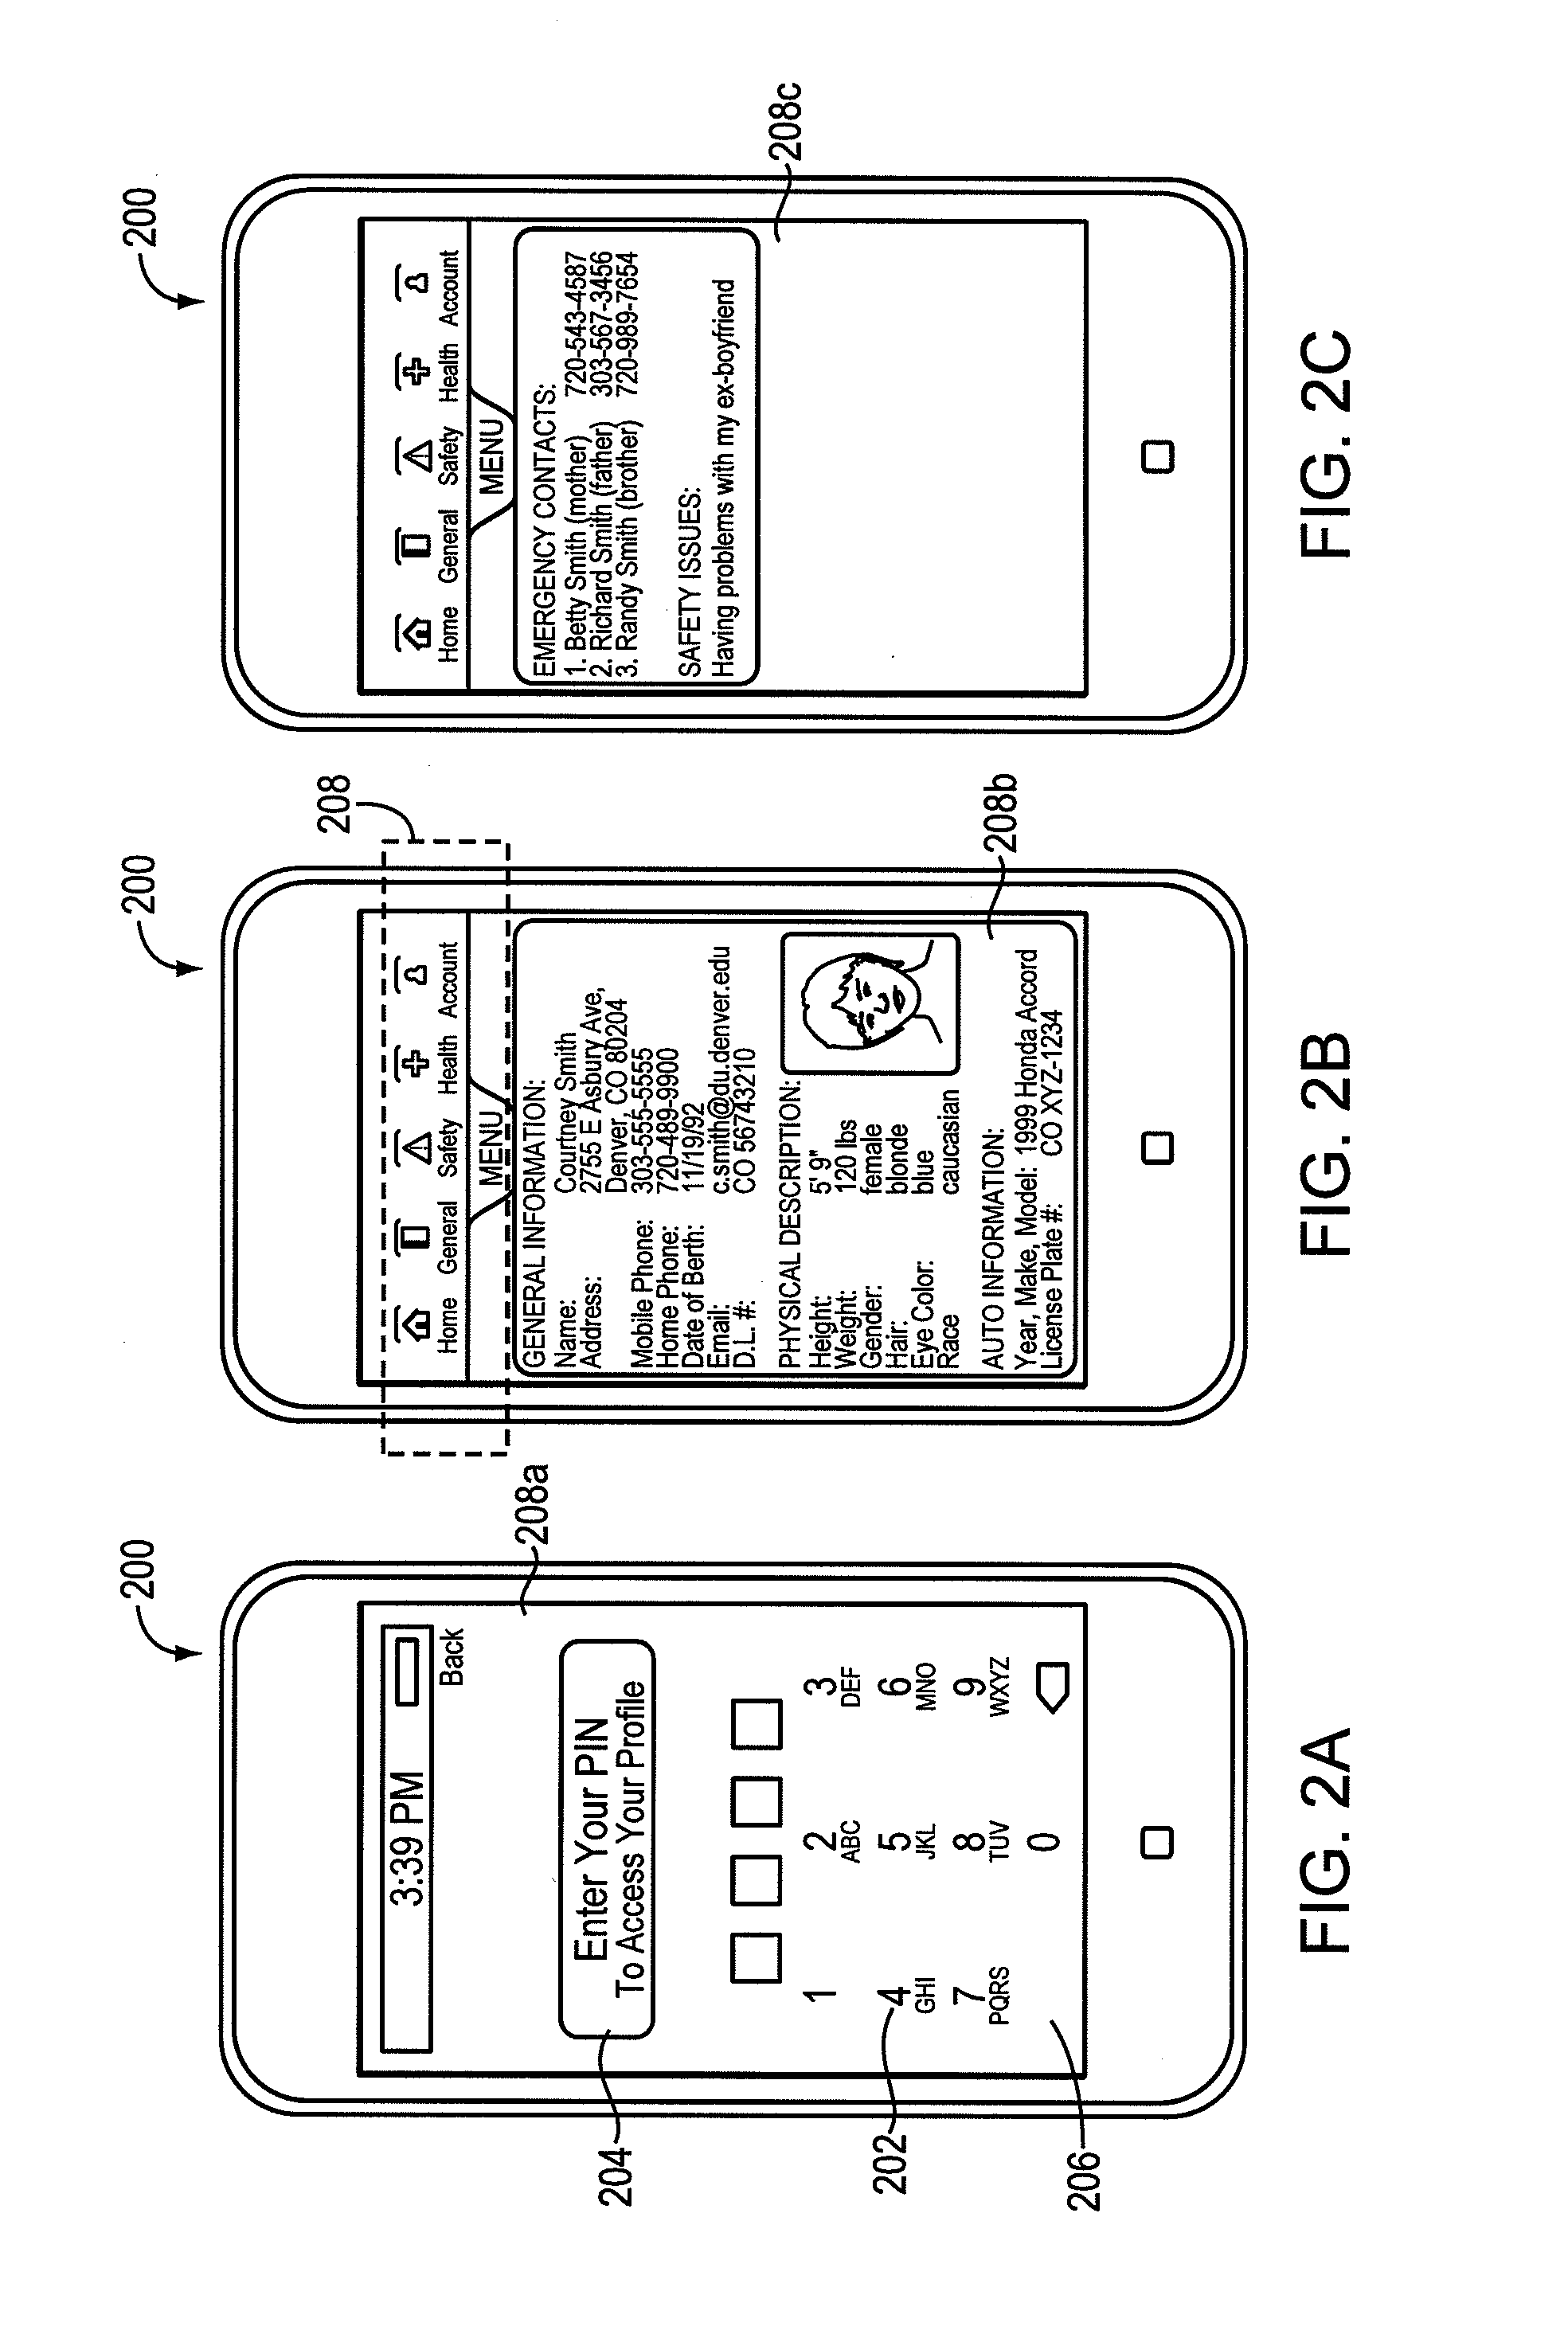 Personal safety application for mobile device and method